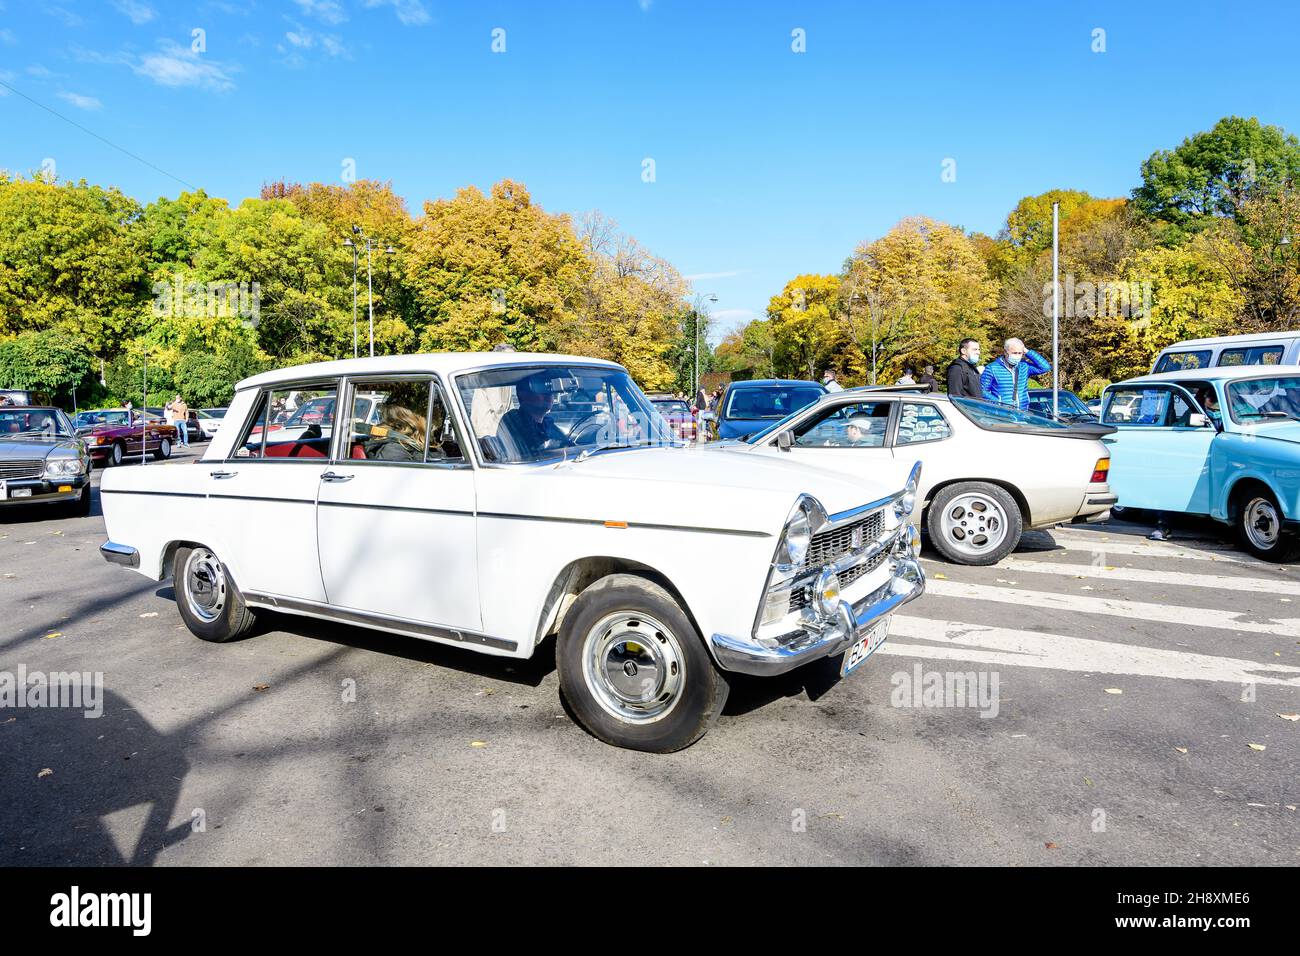 Bucharest, Romania, 24 October 2021: One white Lada vintage car in traffic in a street at an event for vintage cars collections, in a sunny autumn day Stock Photo